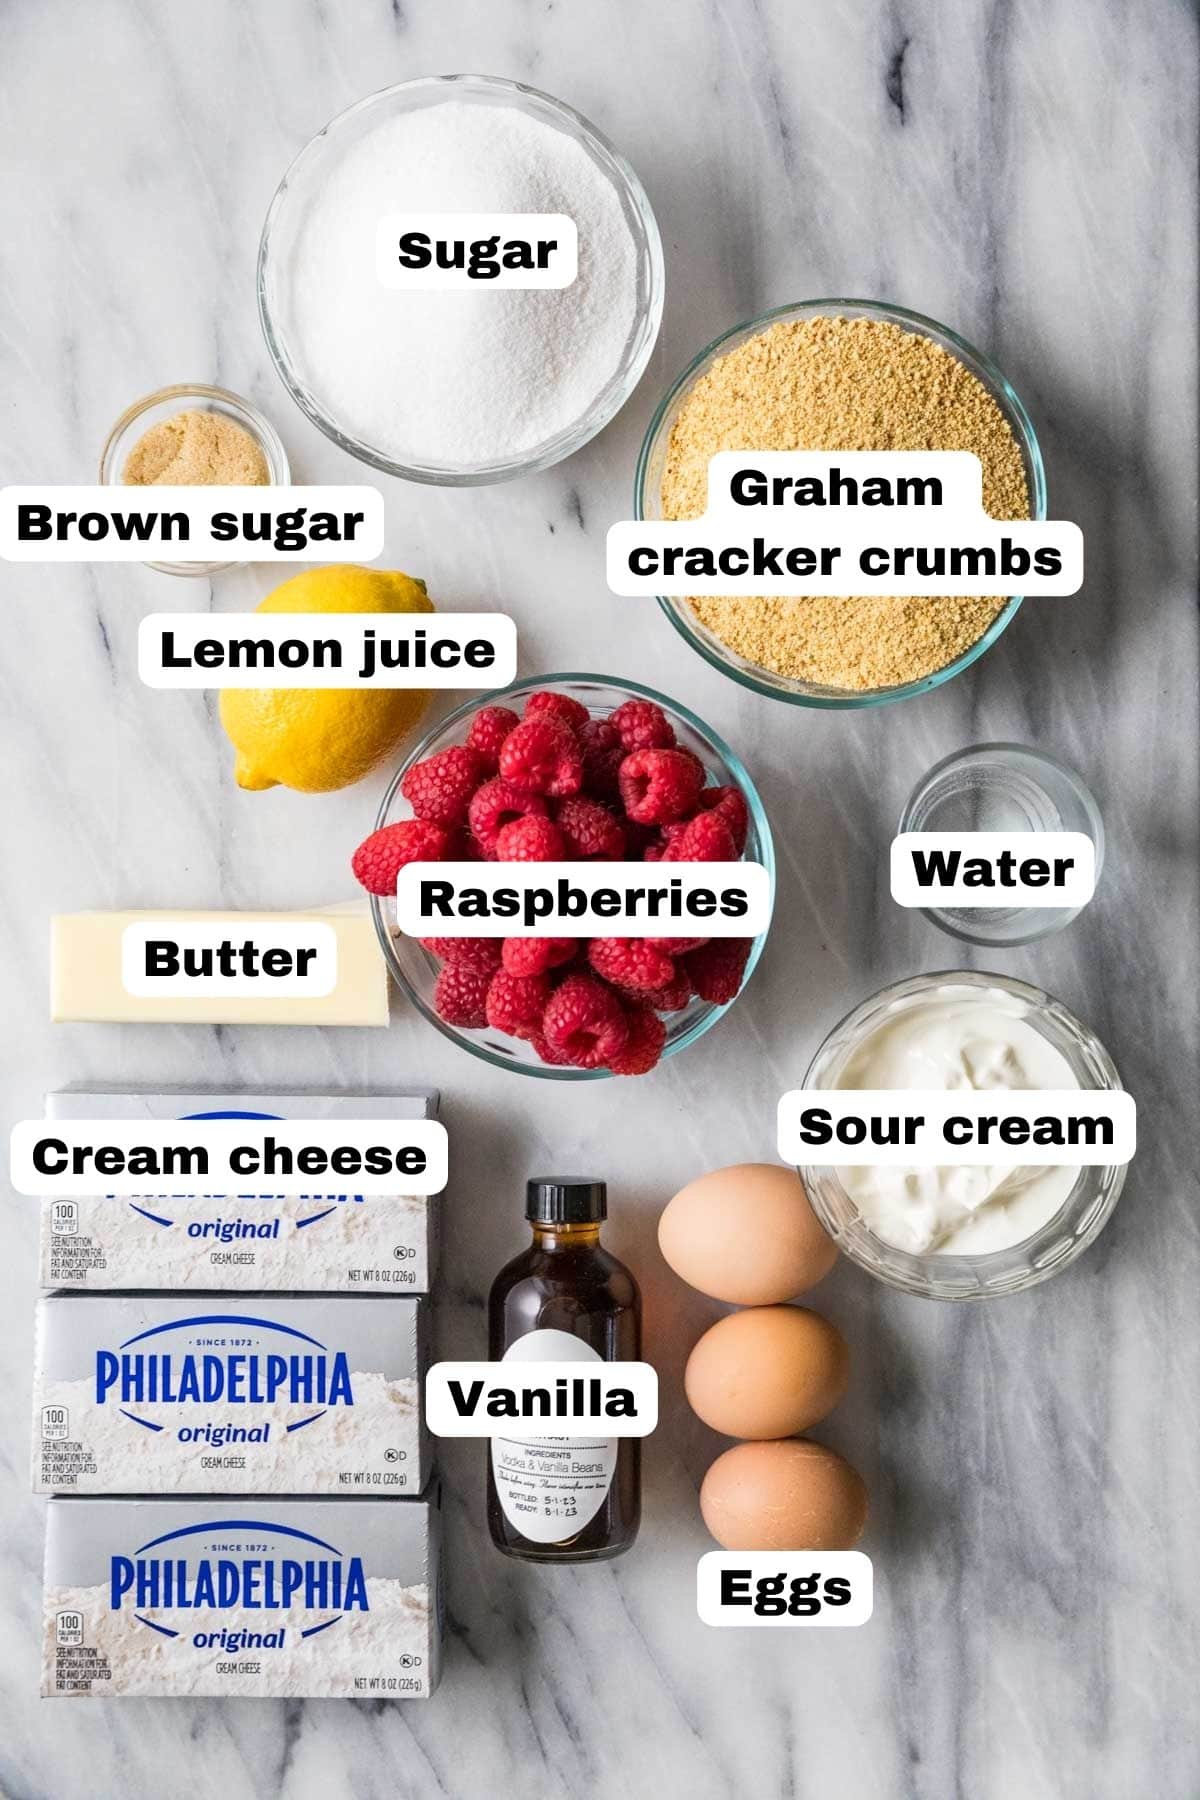 Overhead view of labelled ingredients including sour cream, raspberries, graham cracker crumbs, and more.